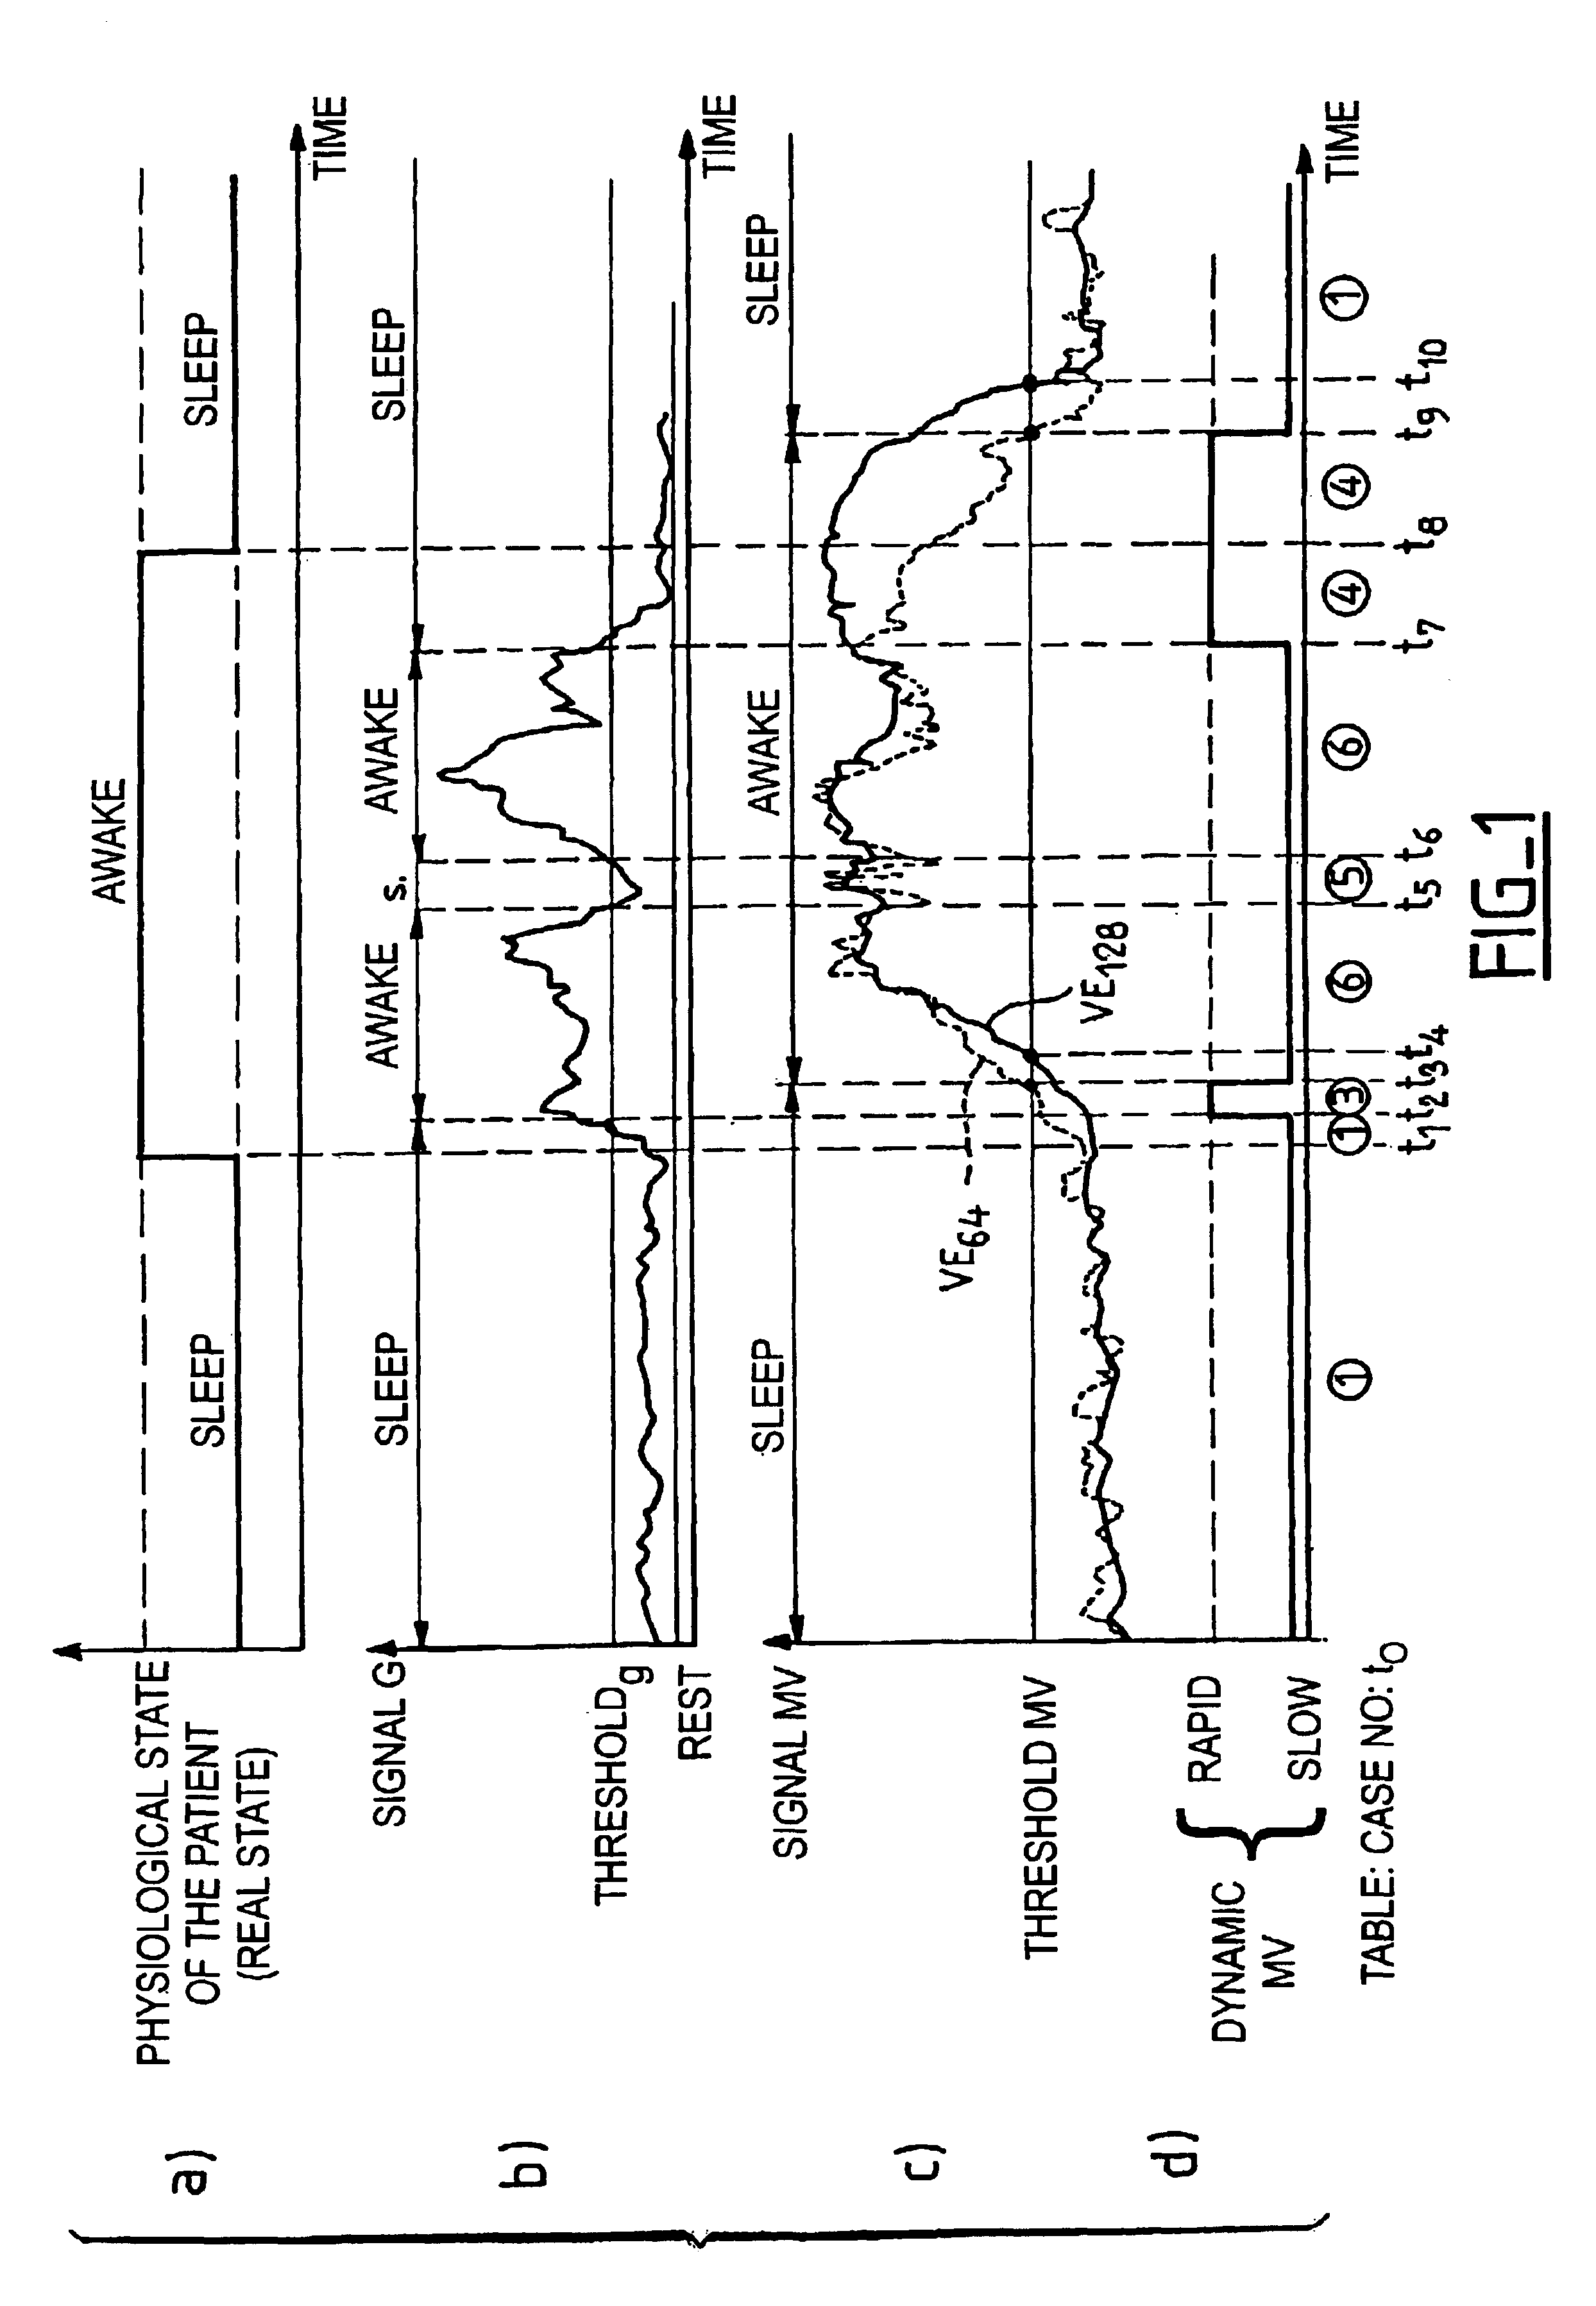 Active medical device for the diagnosis of the sleep apnea syndrome